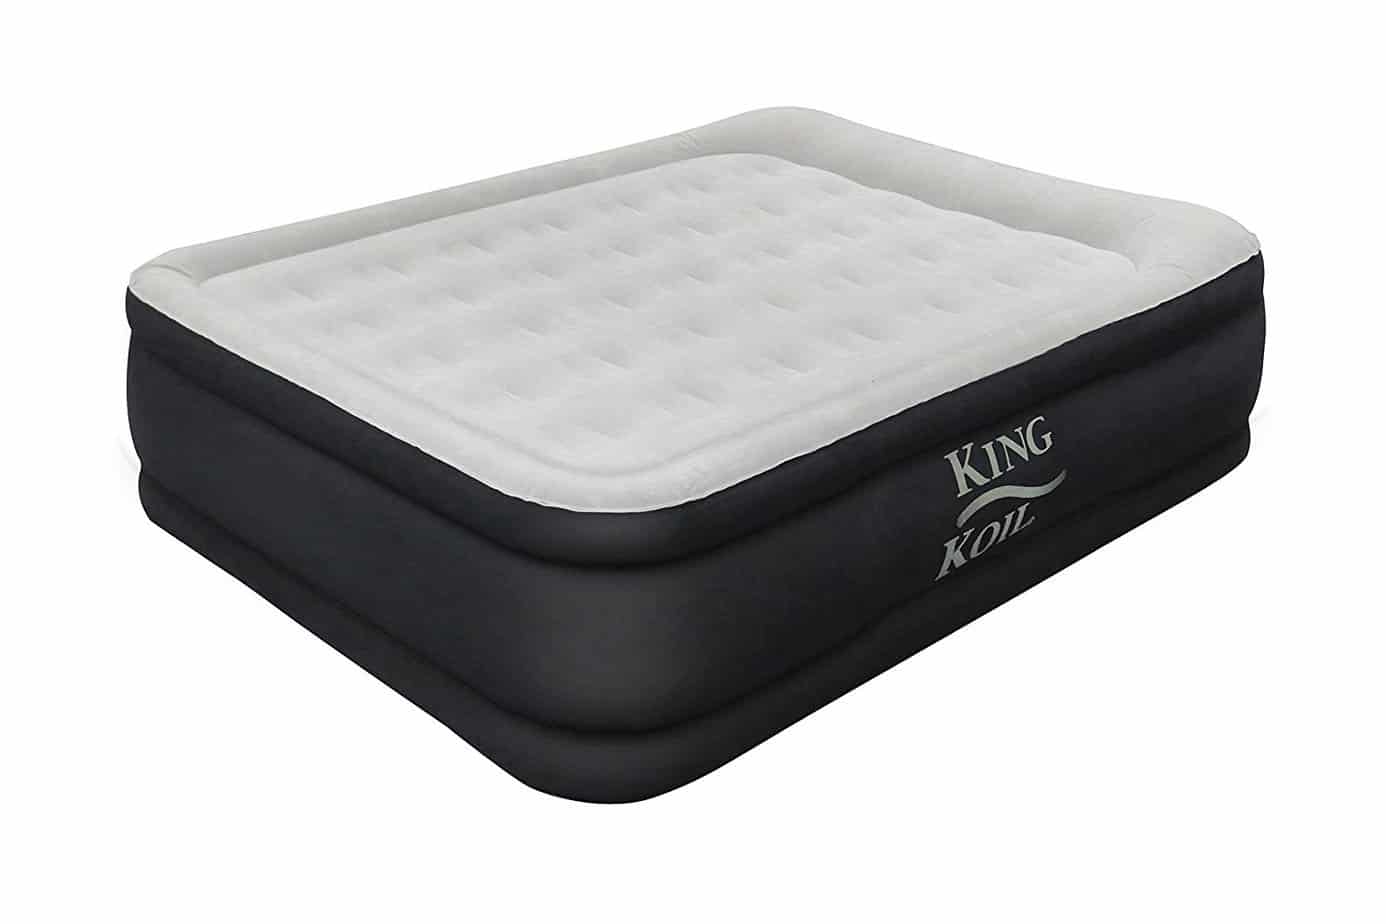 camping air mattress with built-in battery pump